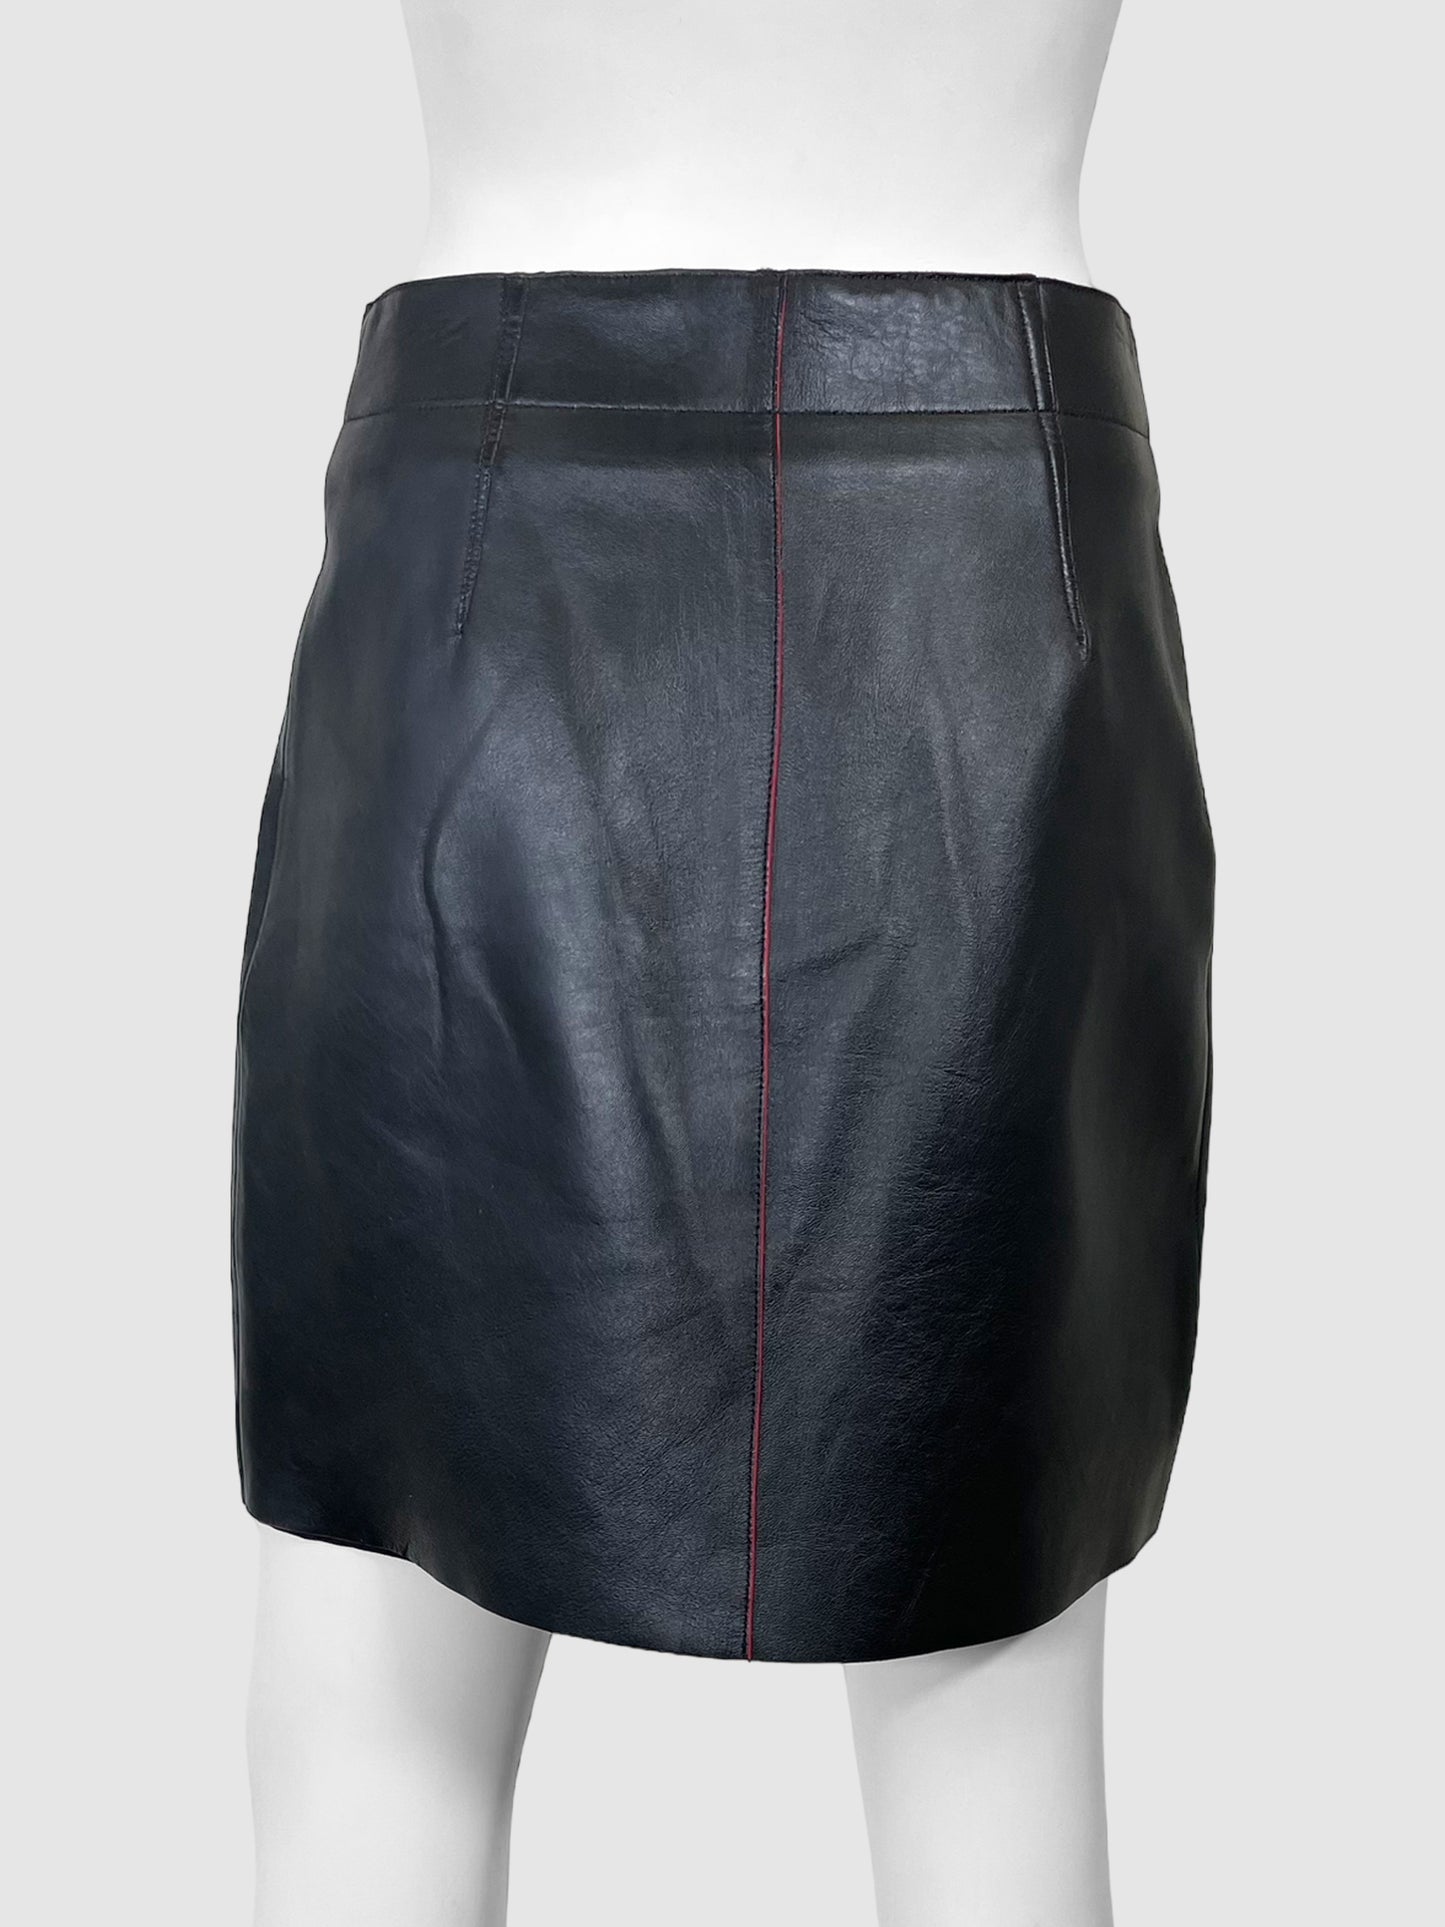 Leather Button-Up Mini Skirt - Size 1